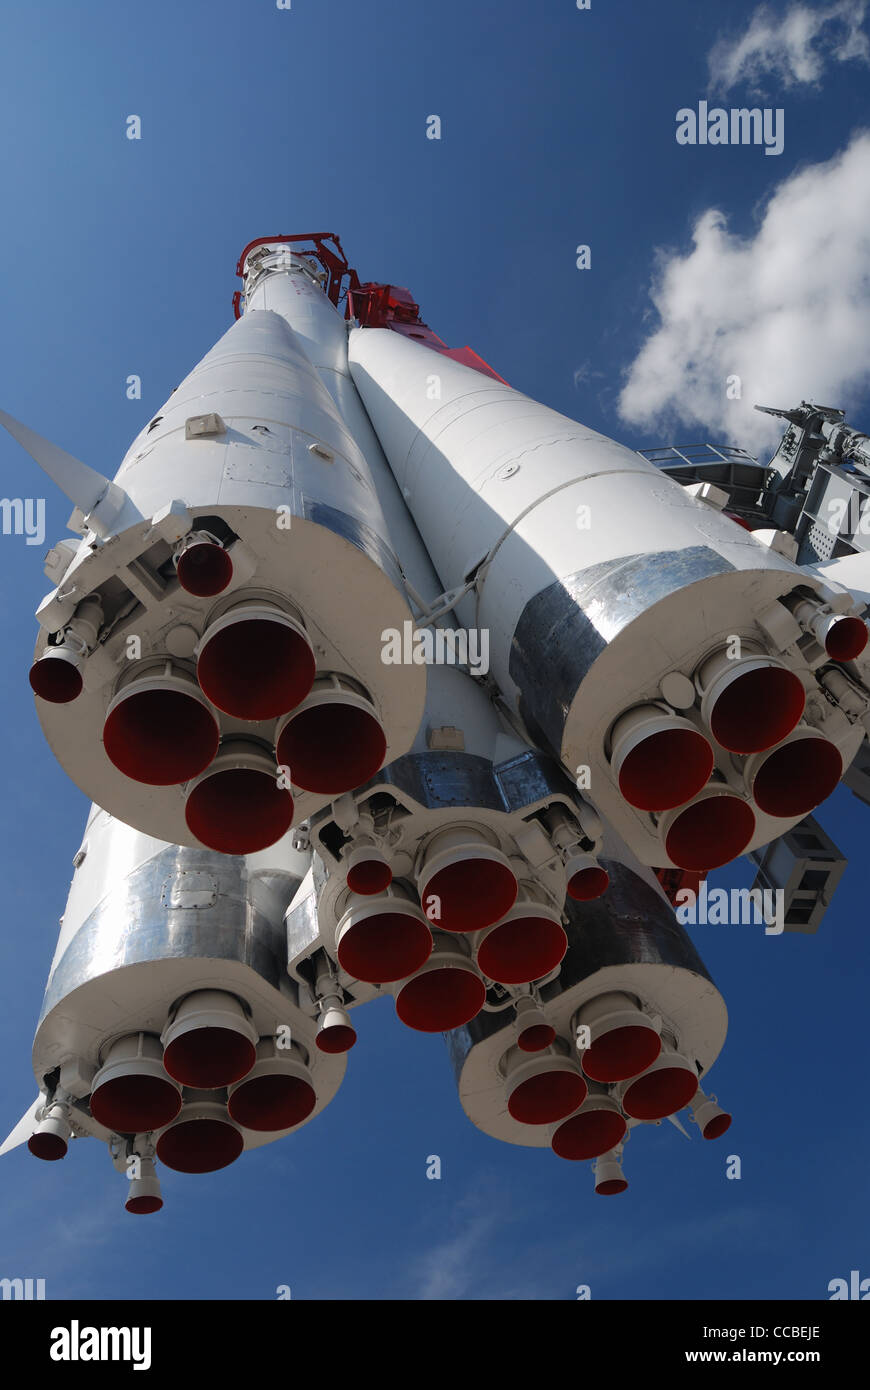 monument of space rocket Vostok-1 (Moscow, Russia) Stock Photo